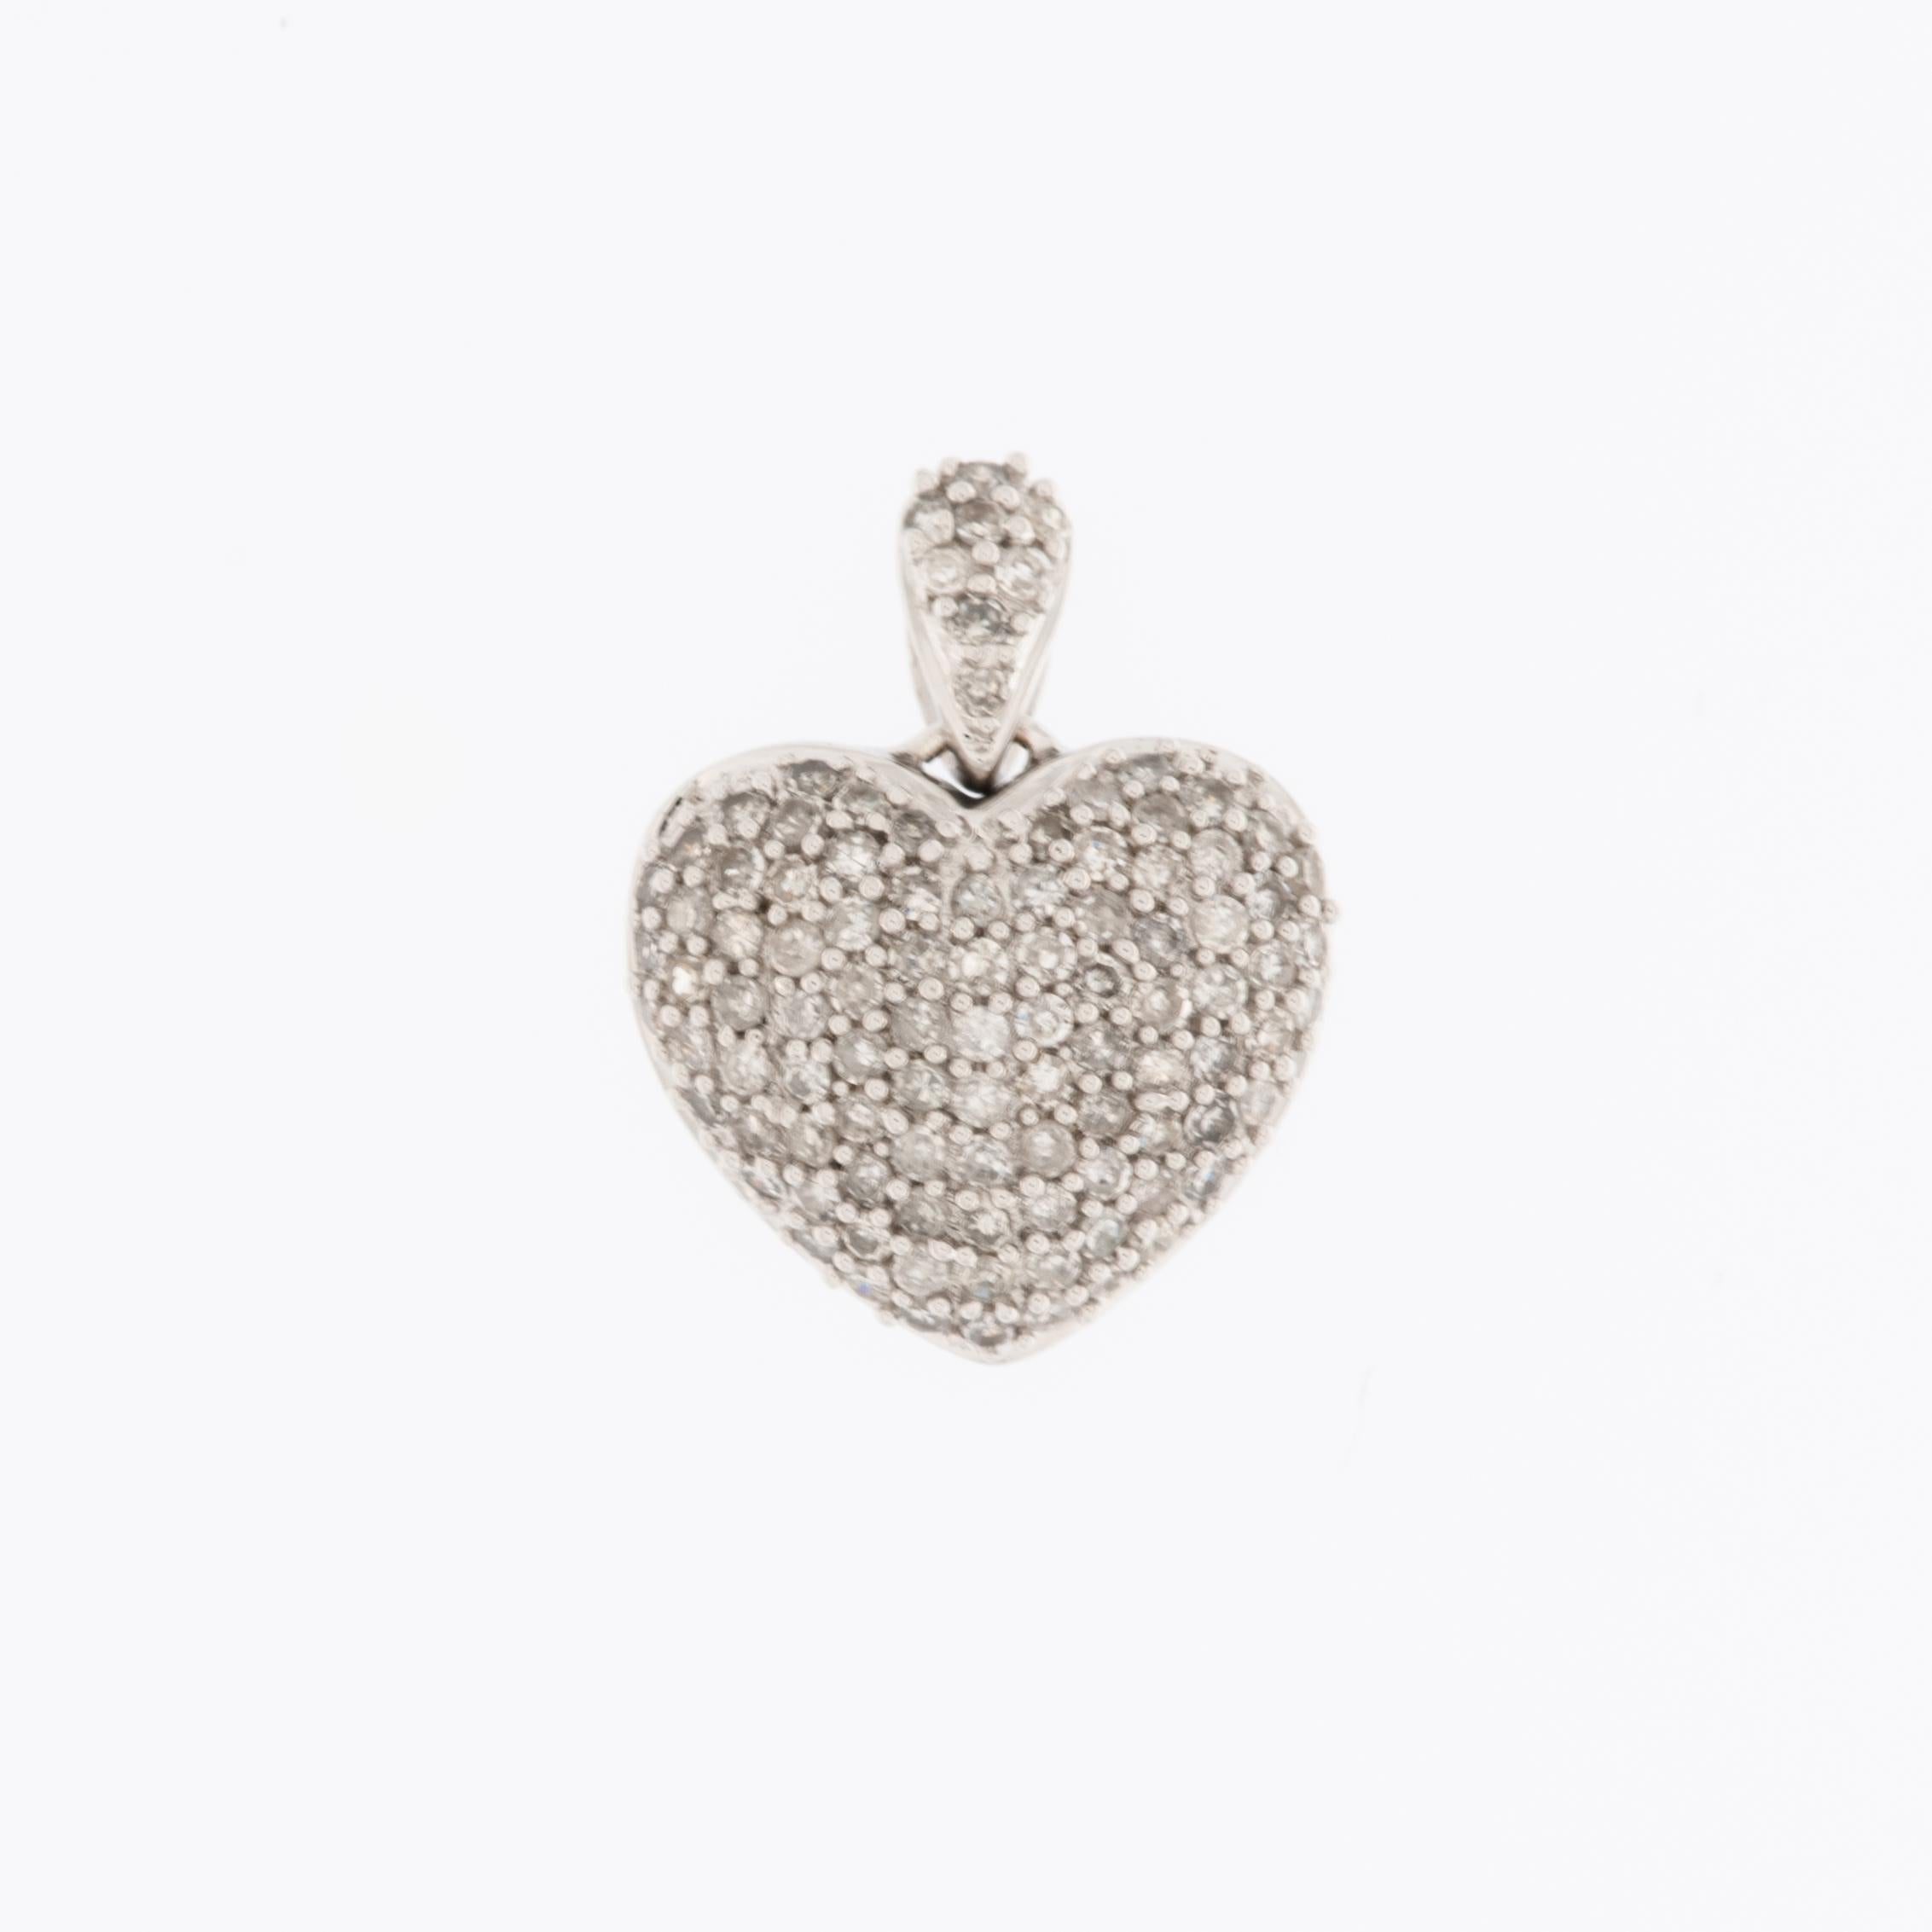 The Pavé Heart Pendant in White Gold with Diamonds is a stunning emblem of grace and elegance. Crafted from 18-karat white gold, this pendant boasts a contemporary design adorned with dazzling brilliance.

The pendant is entirely adorned with